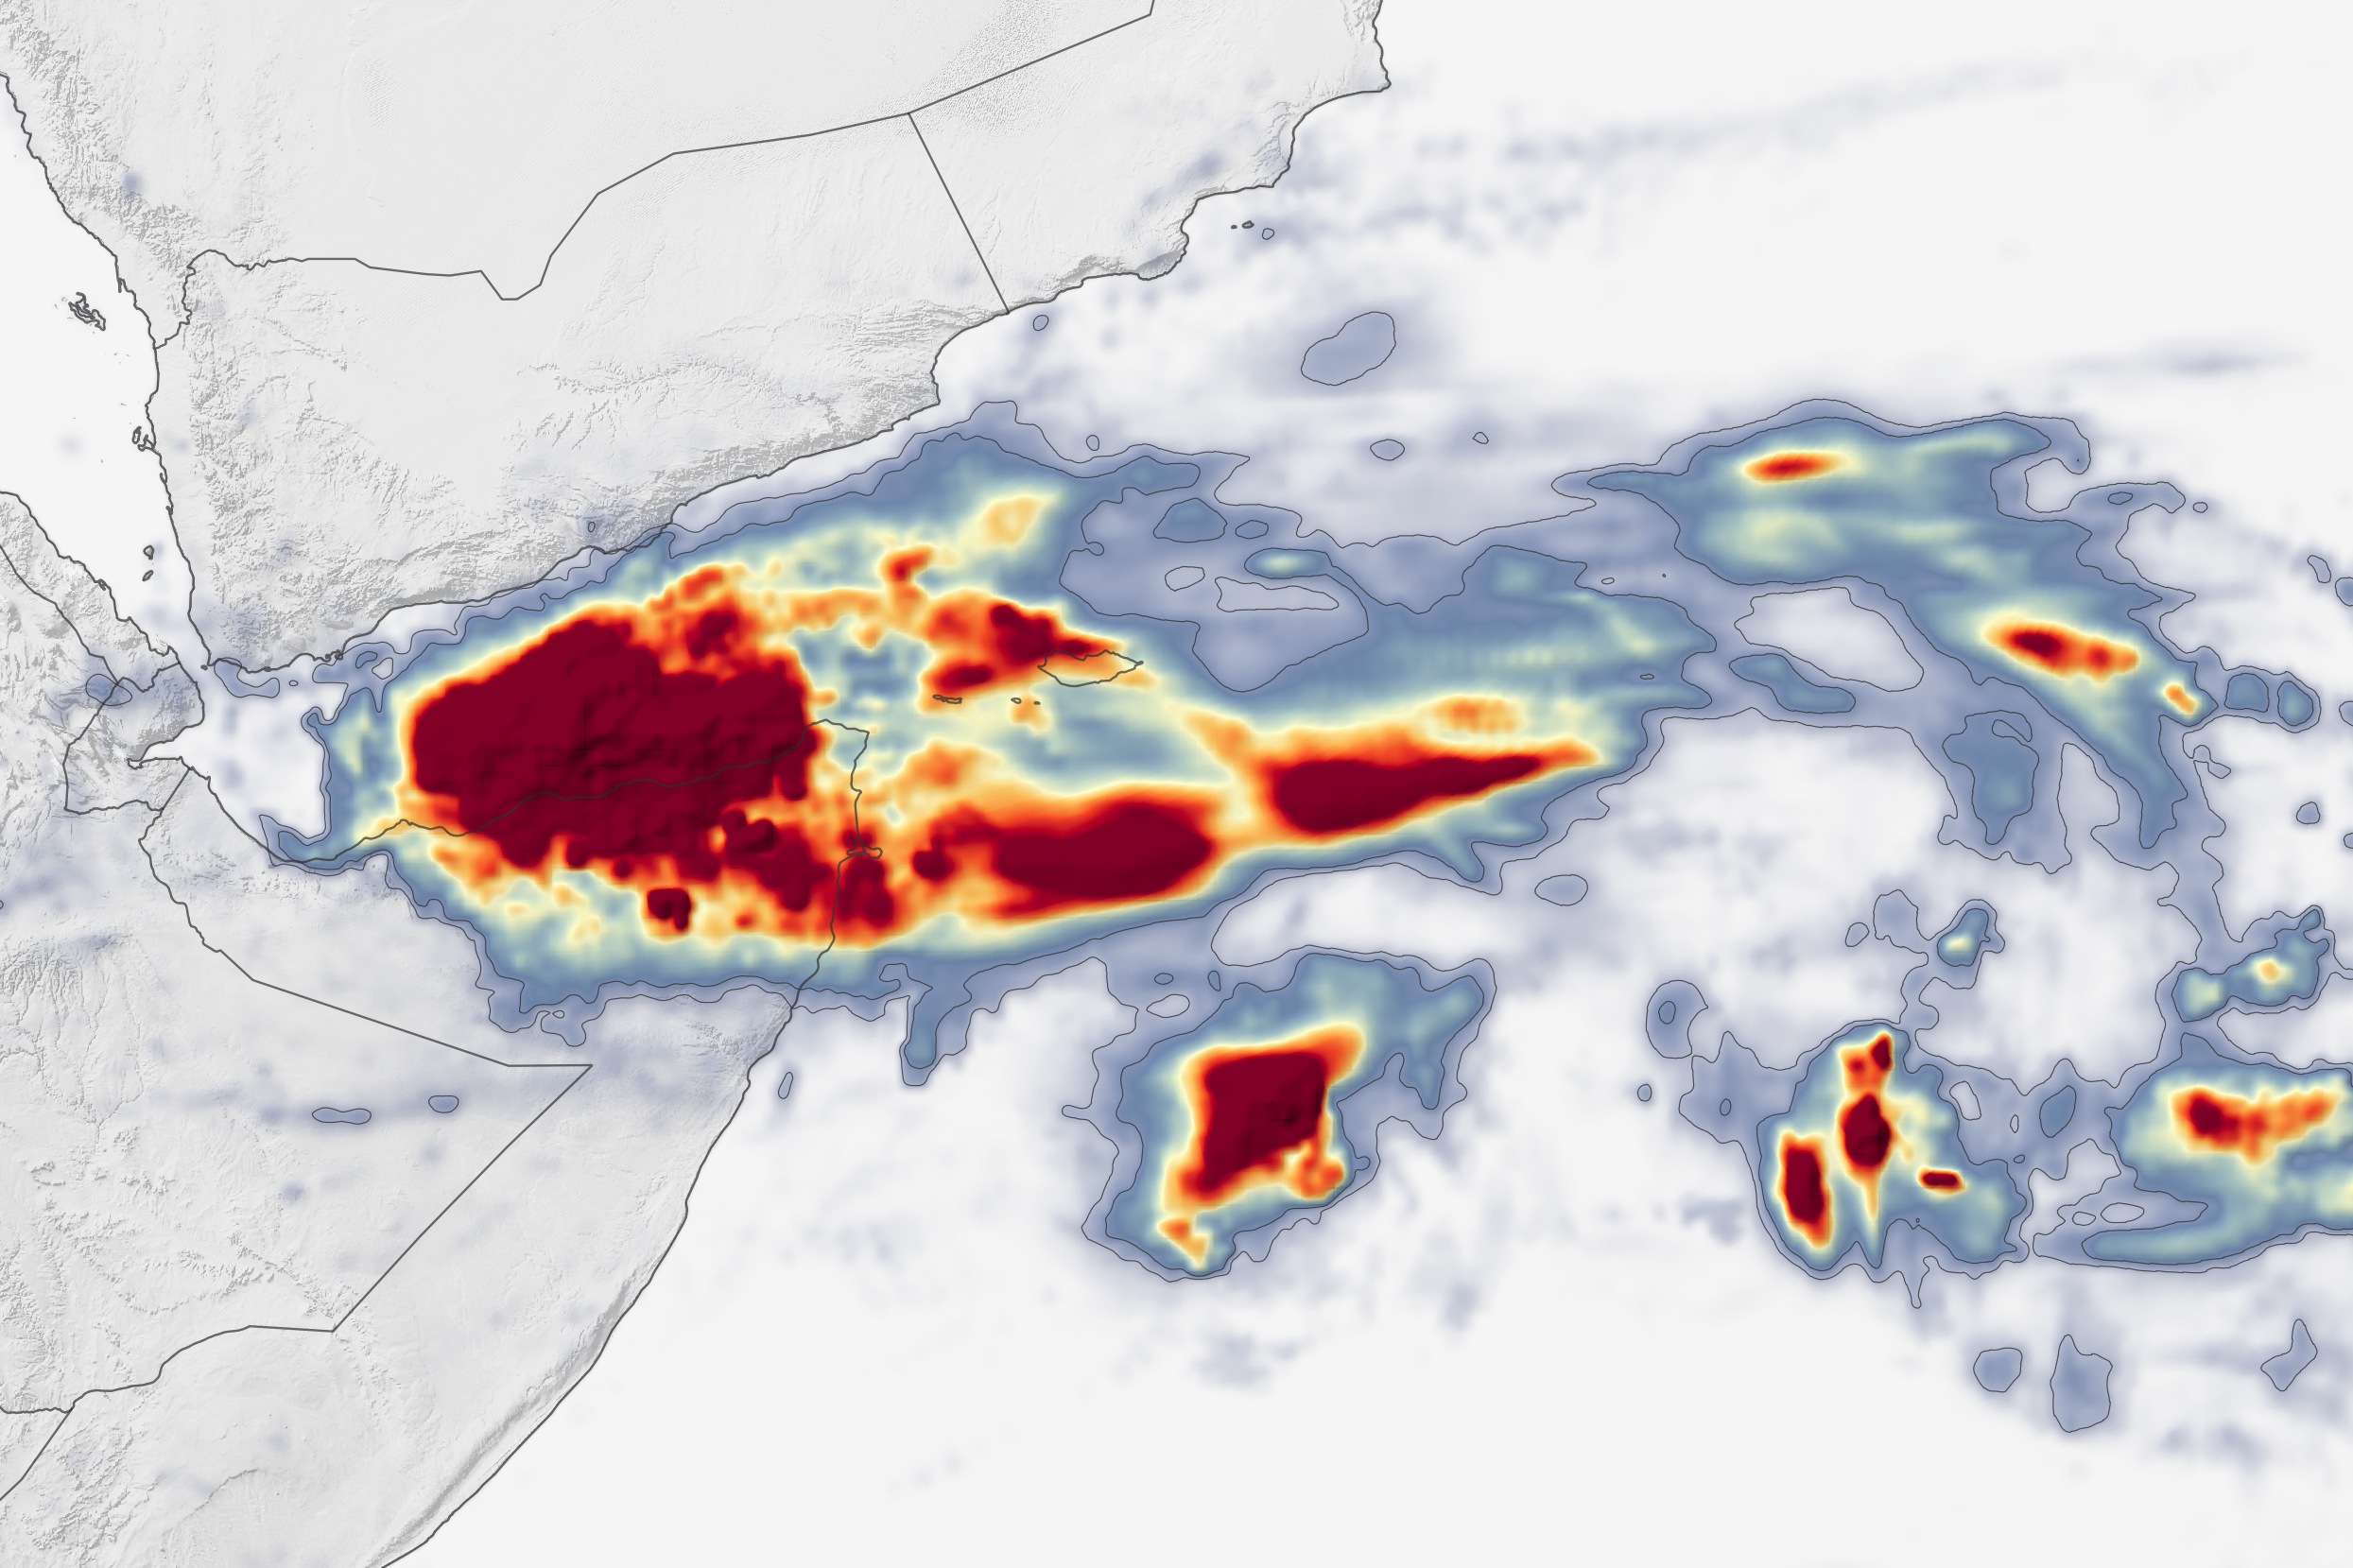 Gati Makes Historic Landfall in Somalia - related image preview